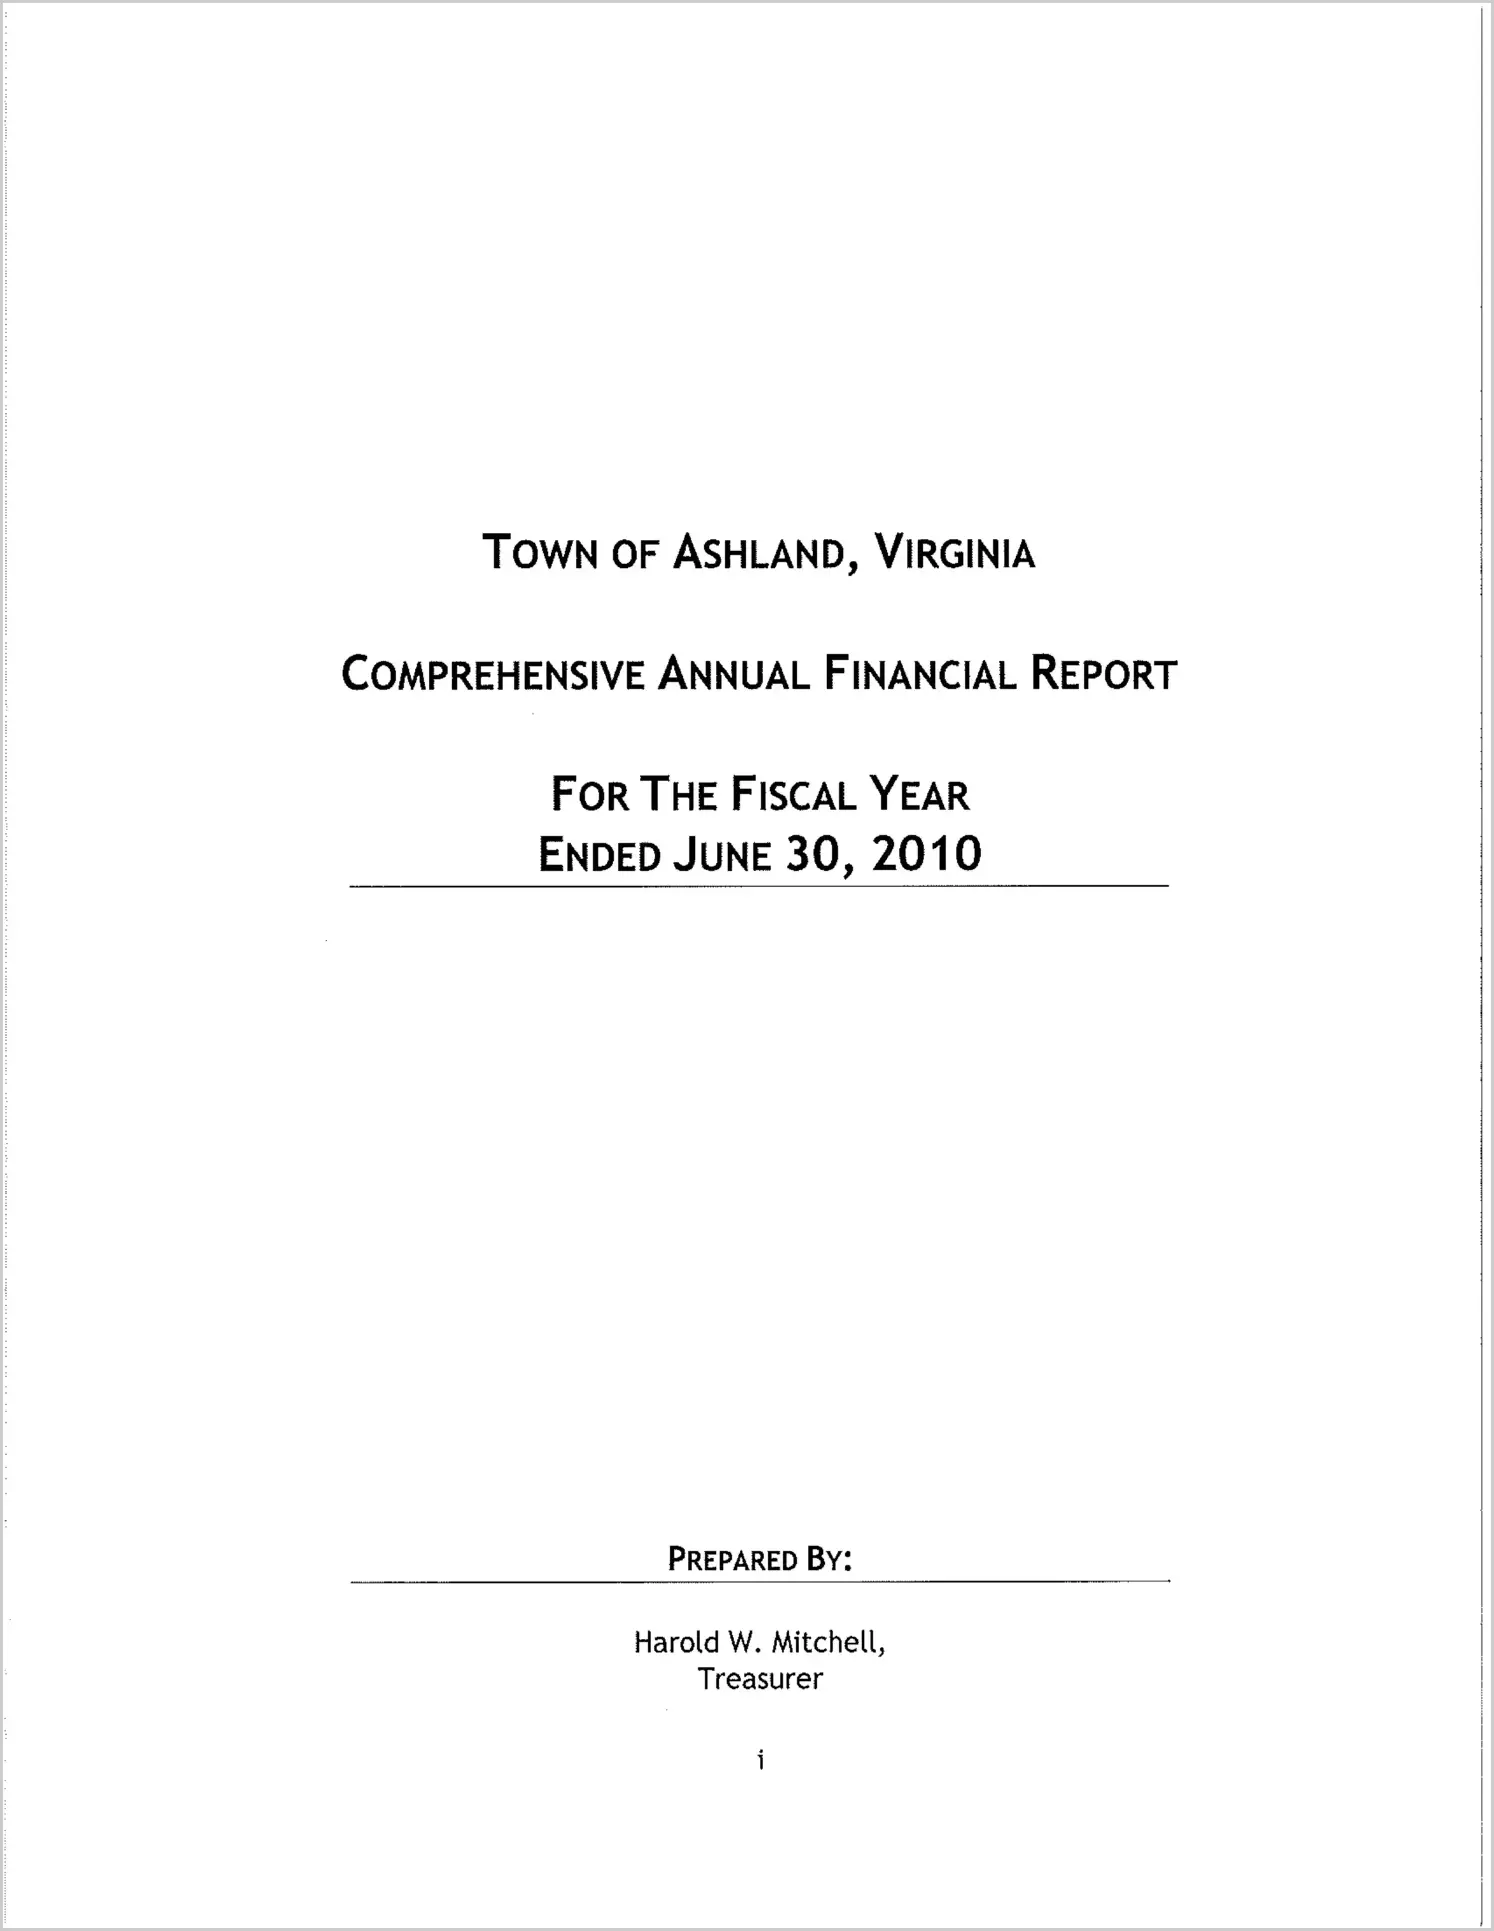 2010 Annual Financial Report for Town of Ashland